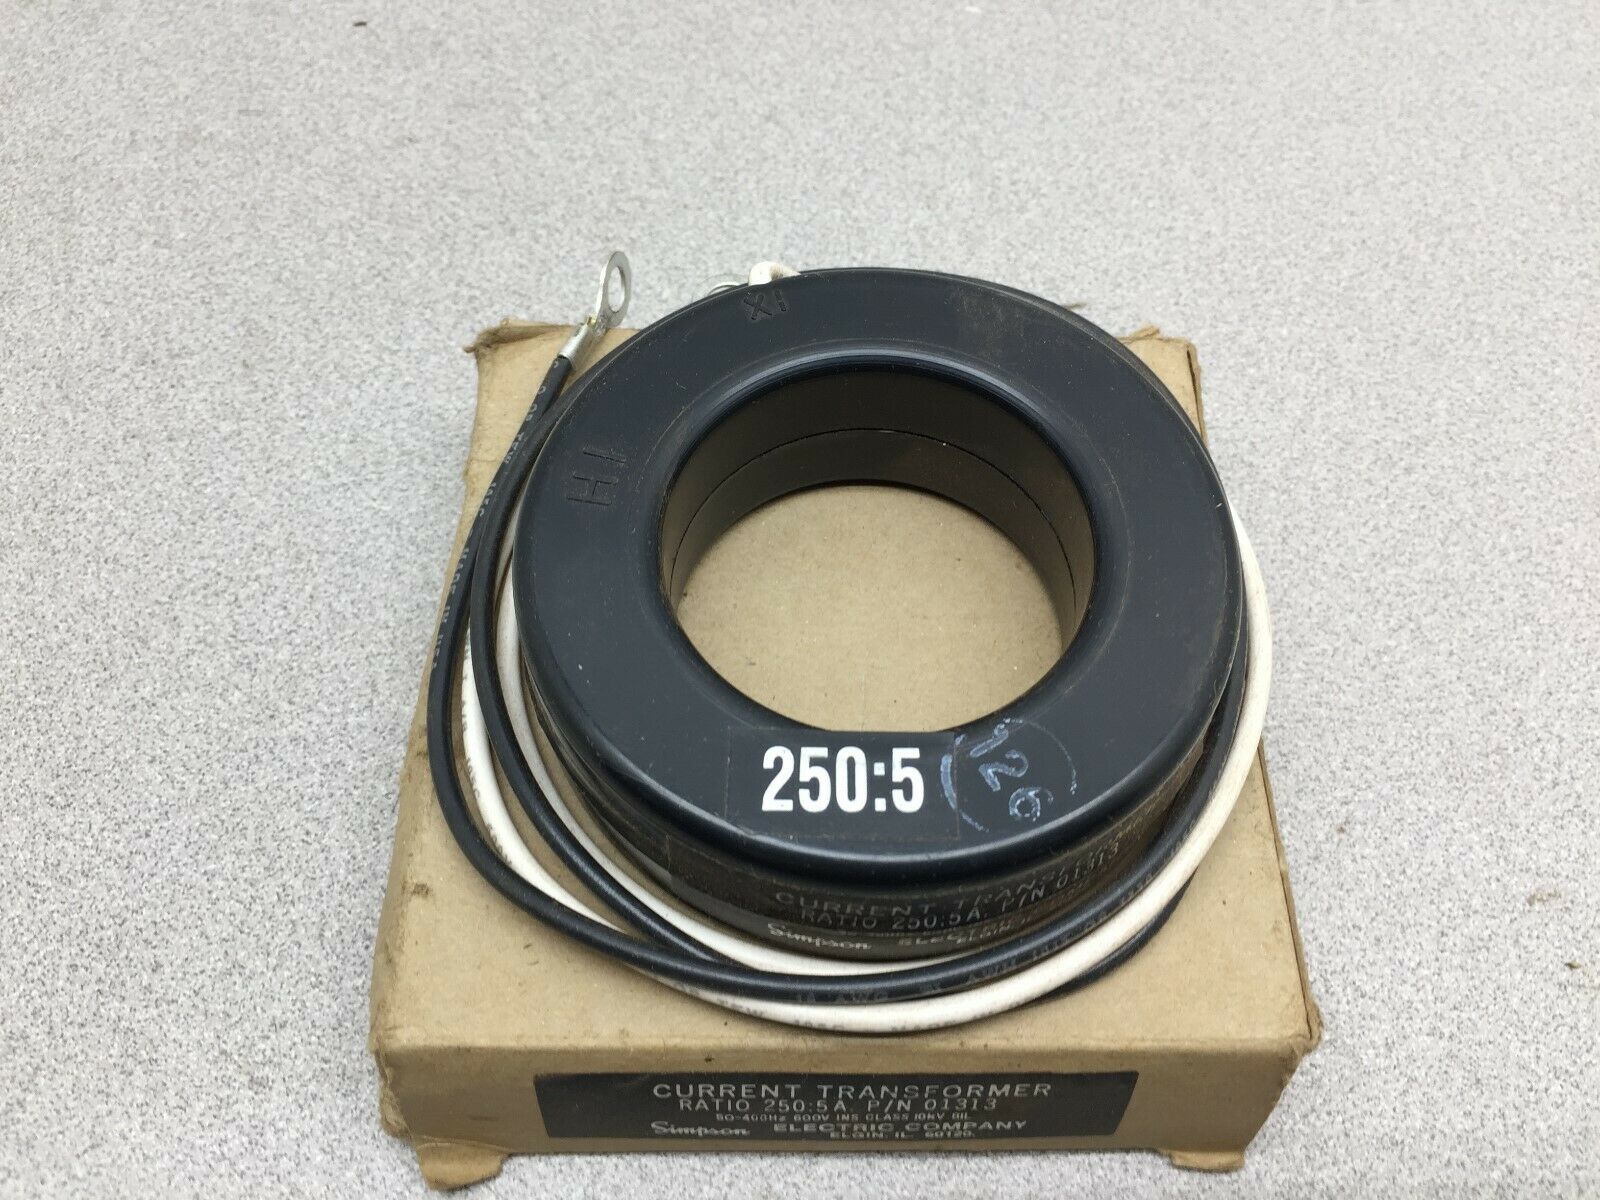 NEW IN BOX SIMPSON 250:5 CURRENT TRANSFORMER 01313